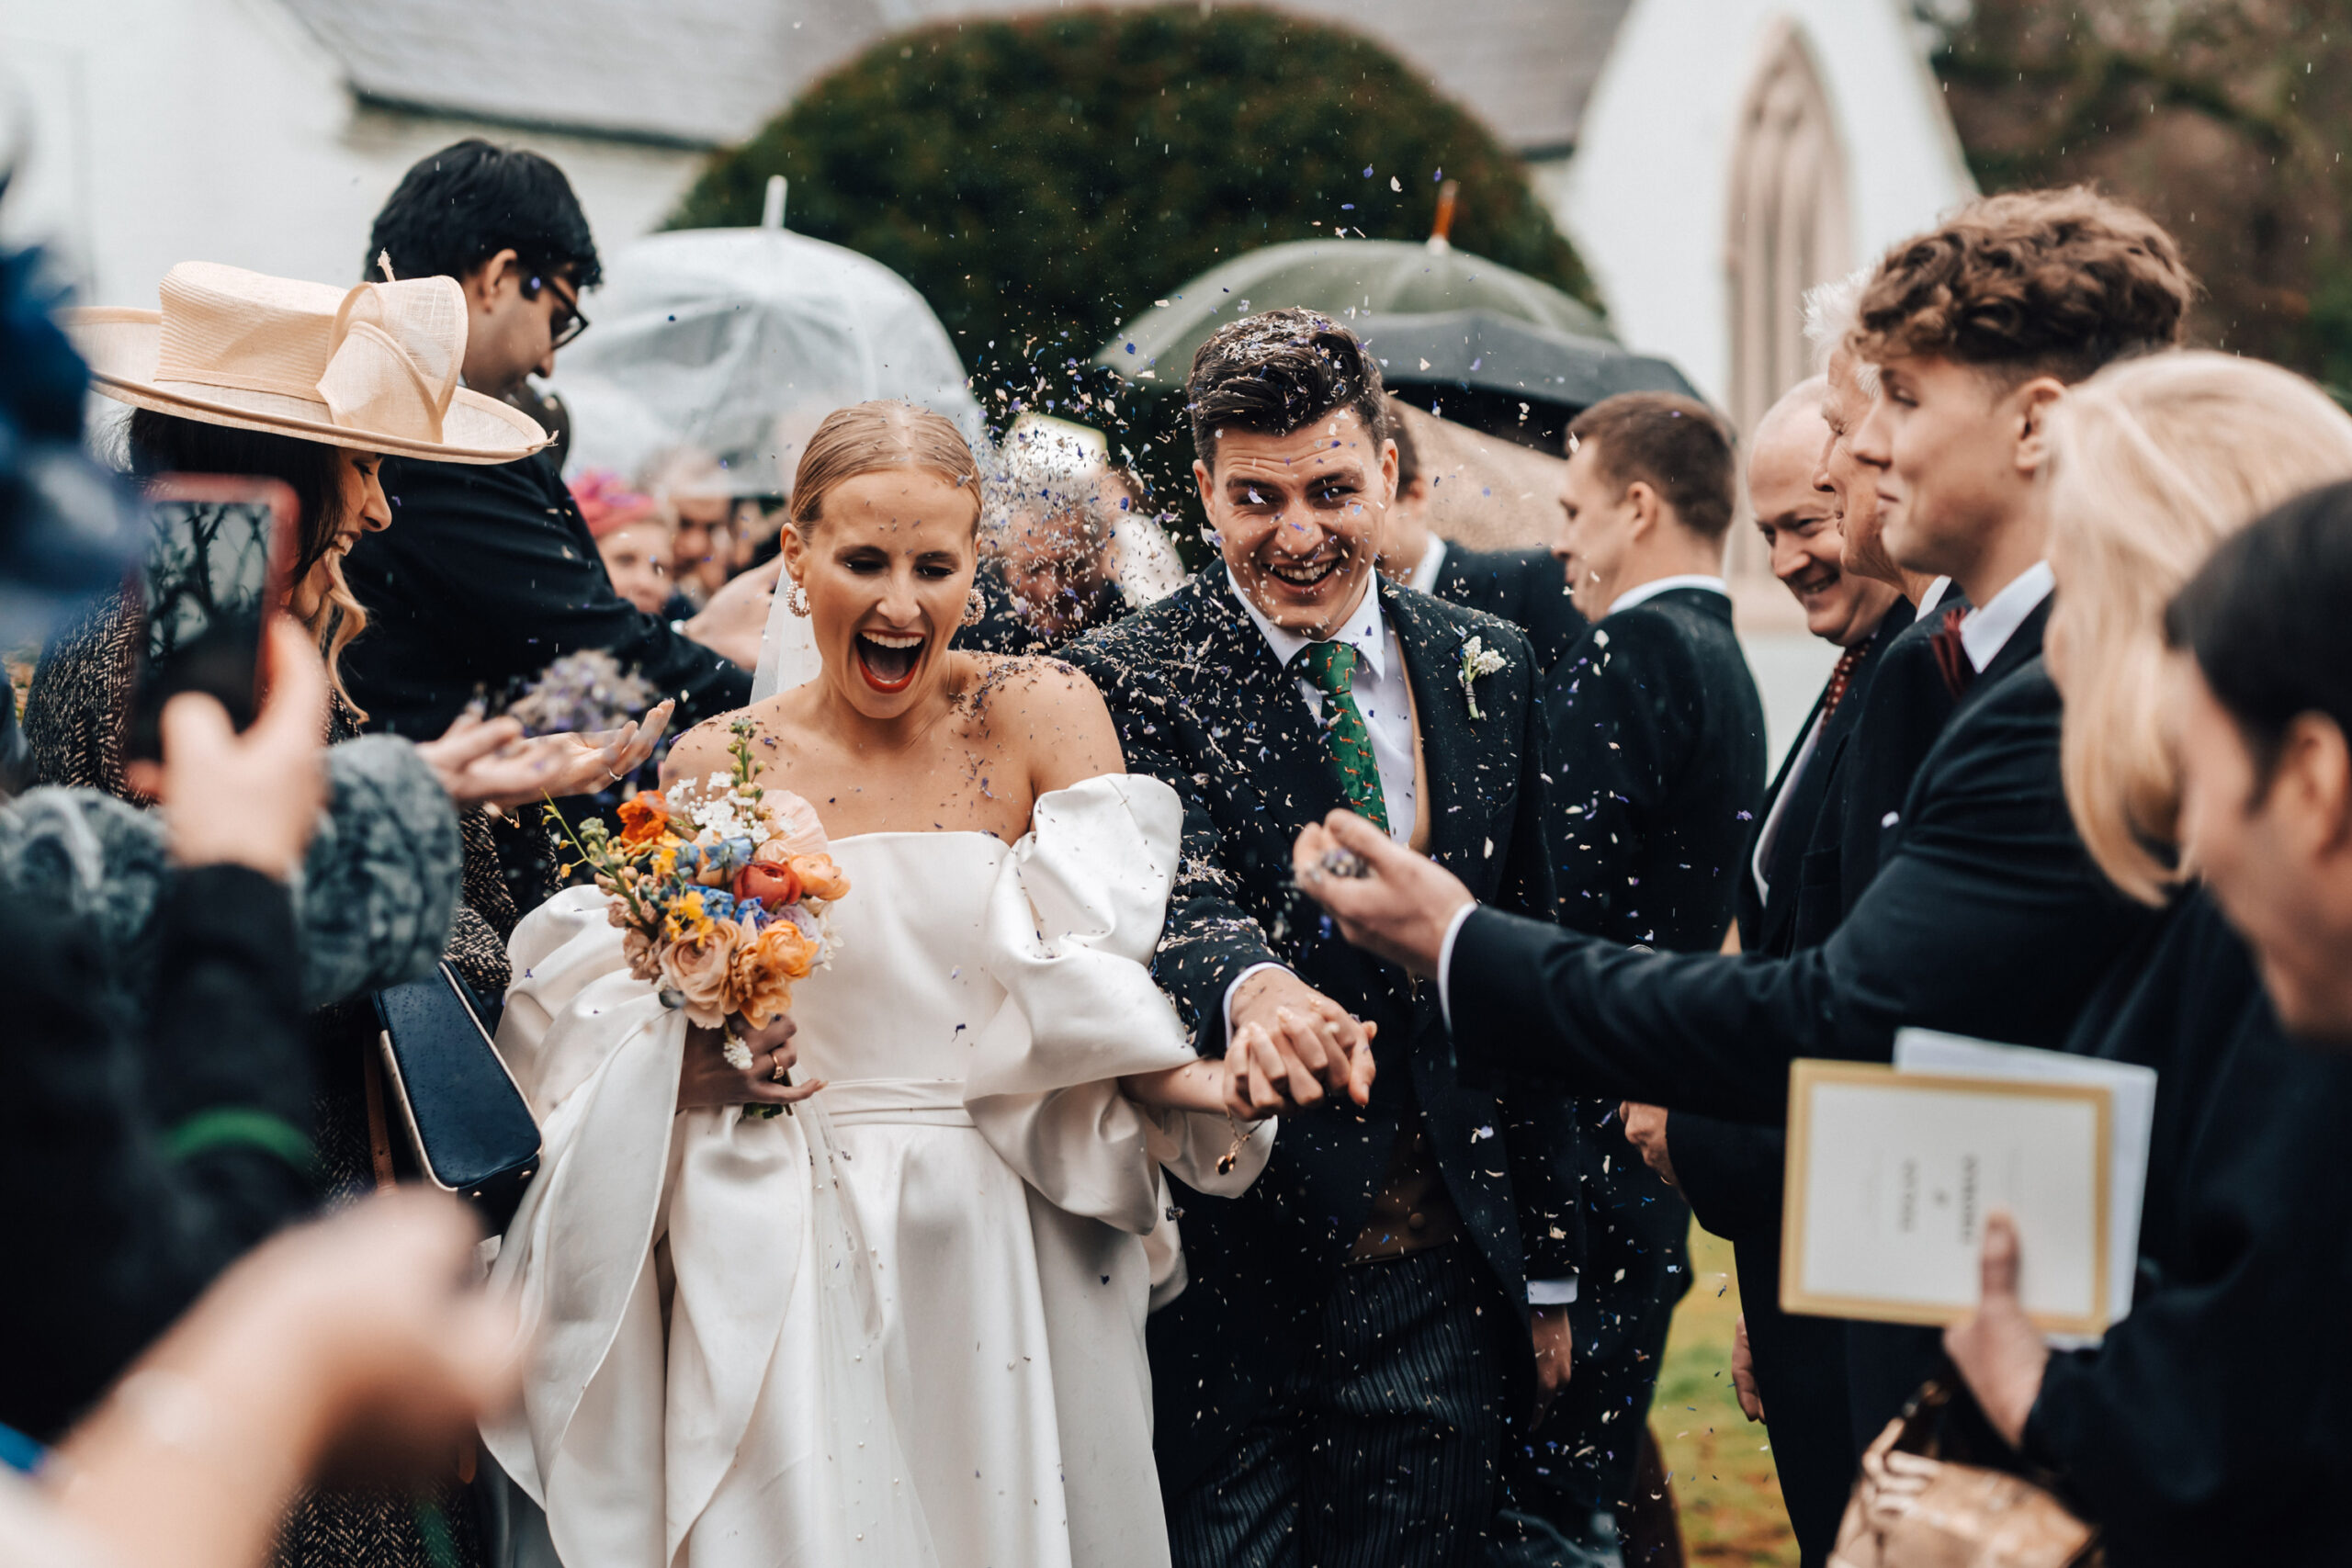 A bride and groom showered in confetti thrown on them by their guests outside a church